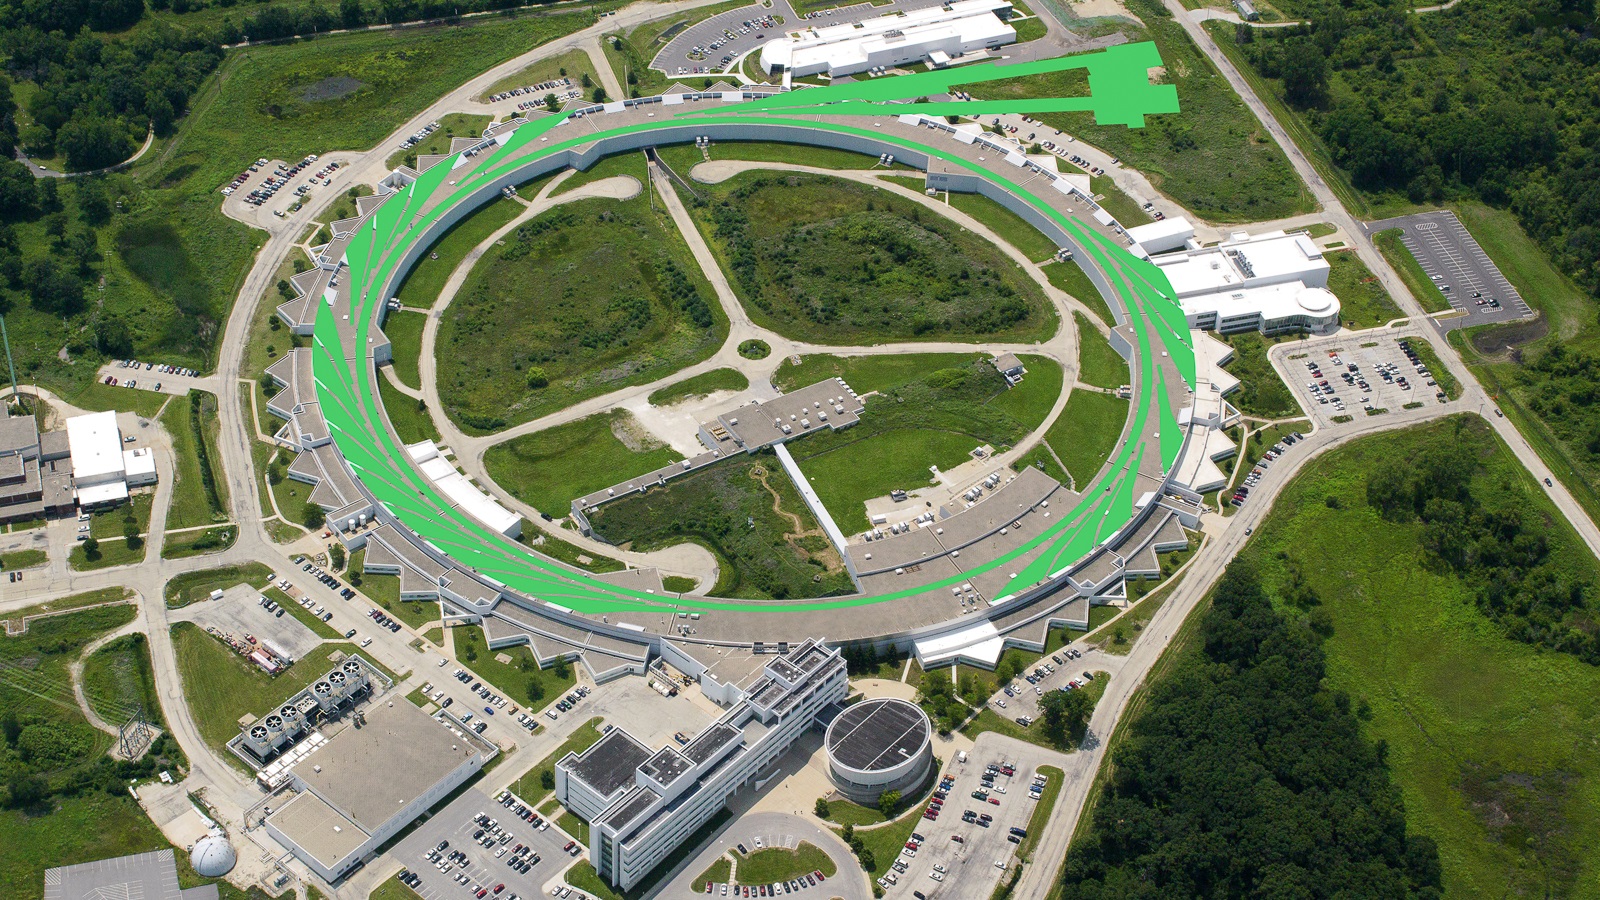 This superimposed image shows the storage ring and beamlines that will be newly built or updated for the APS Upgrade, including the Long Beamline Building (upper right), a new structure that will house two longer beamlines.